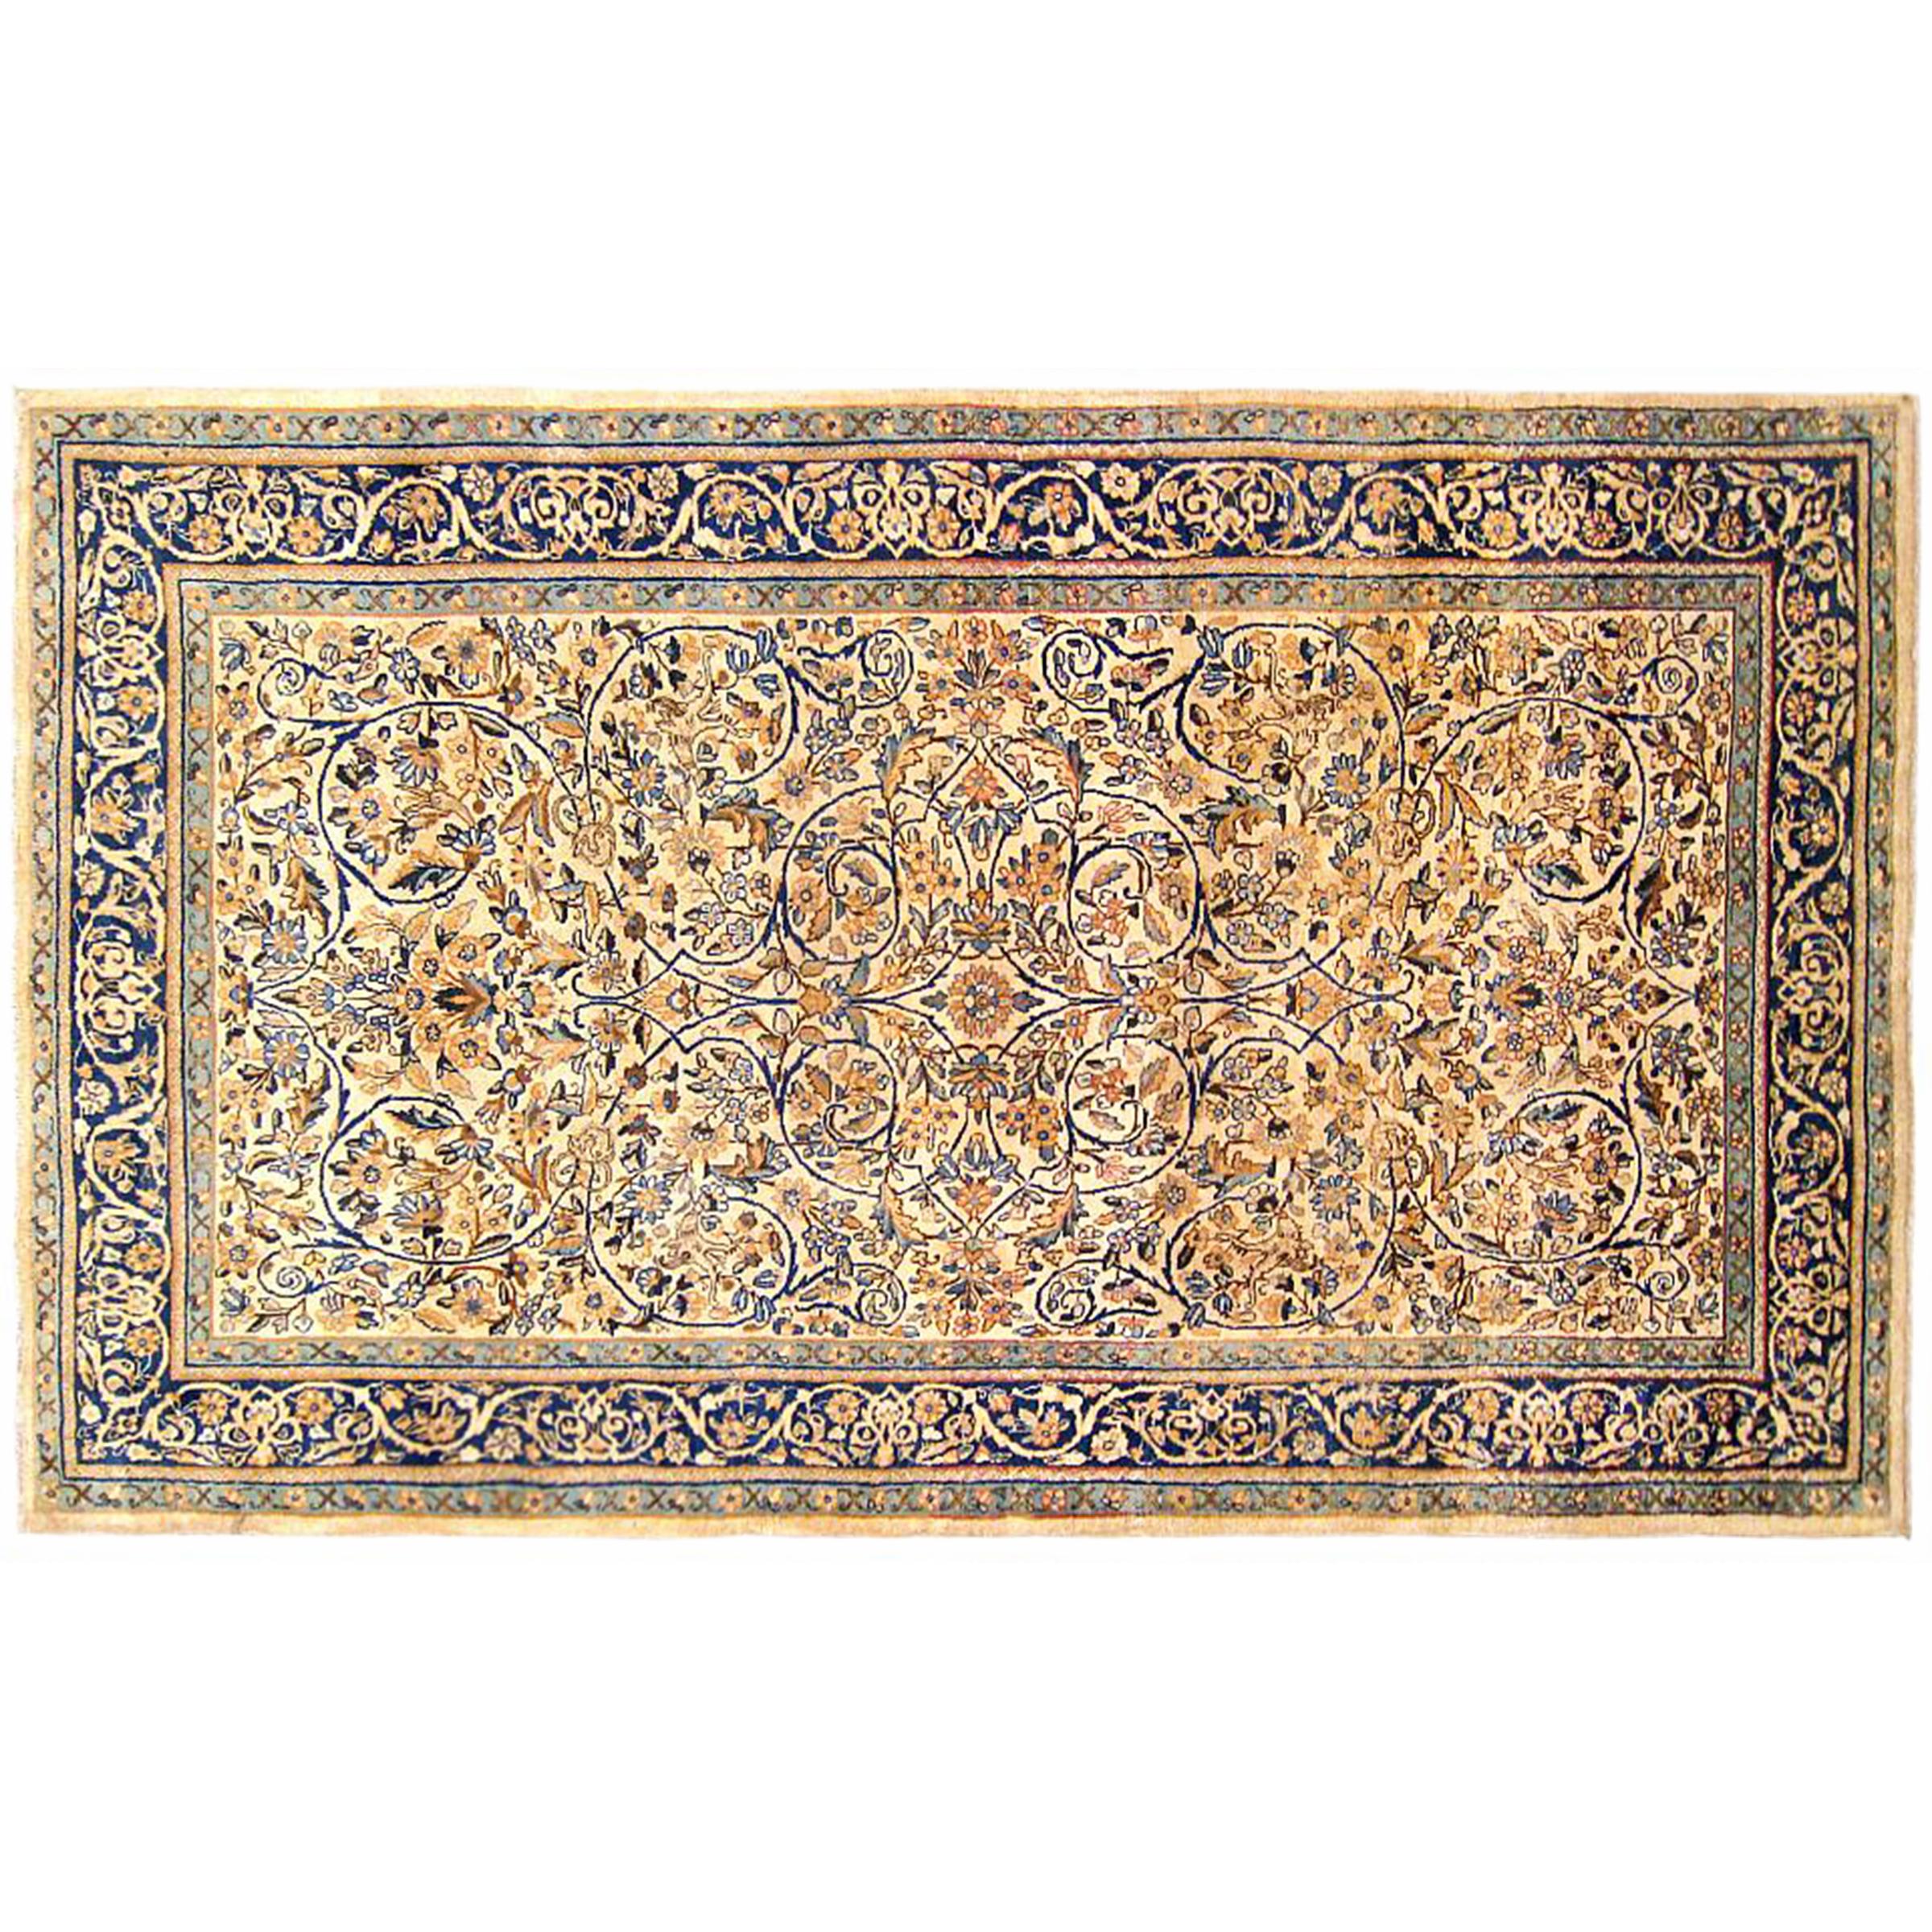 Antique Persian Kerman Carpet, in Small Size, with Ivory Field and Floral Design